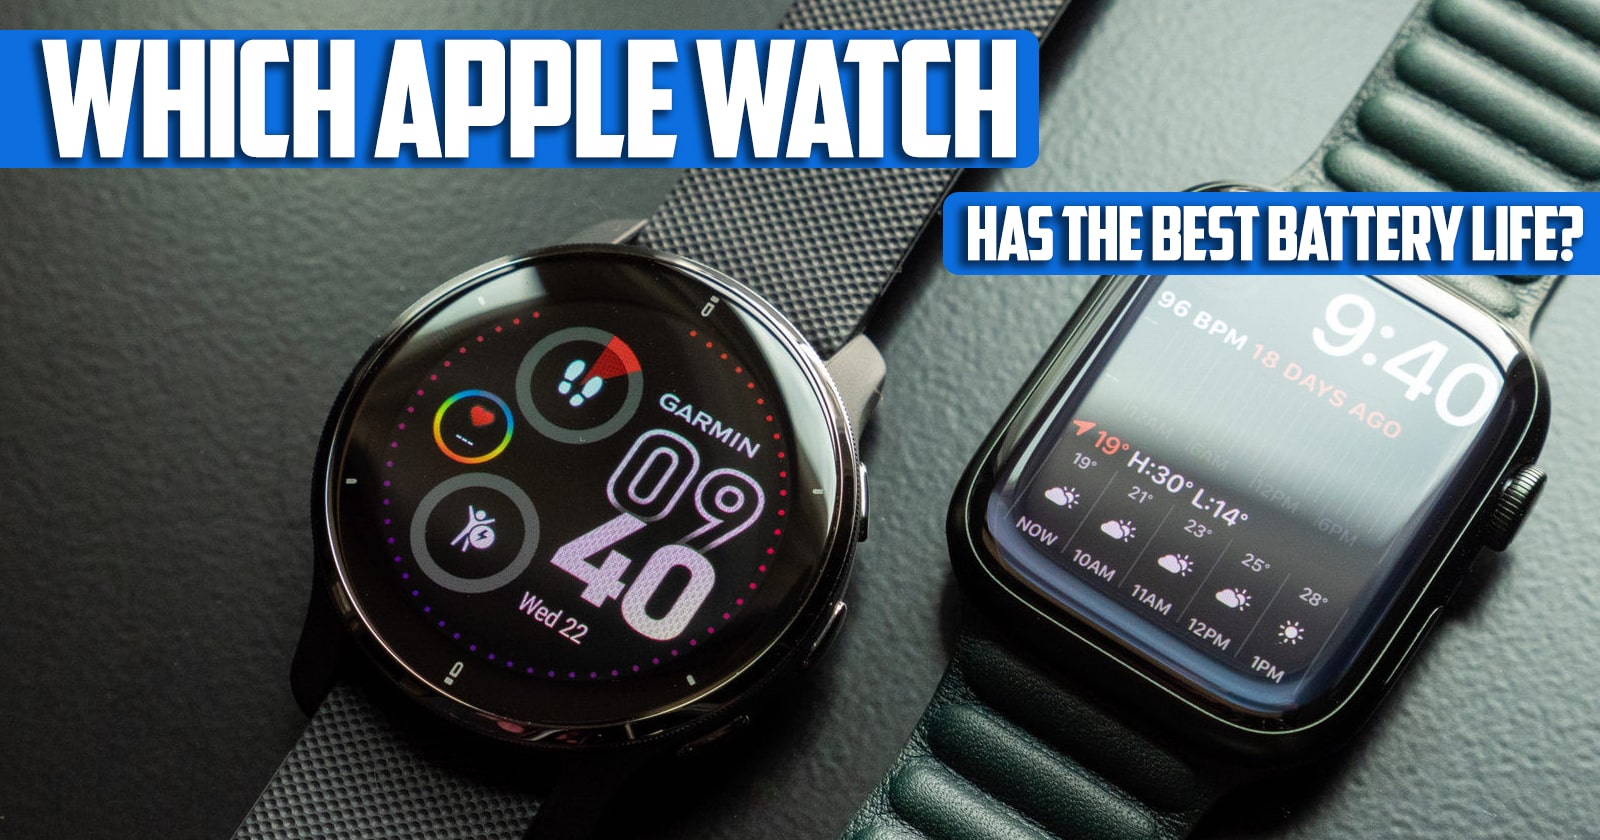 Which apple watch has the best battery life?